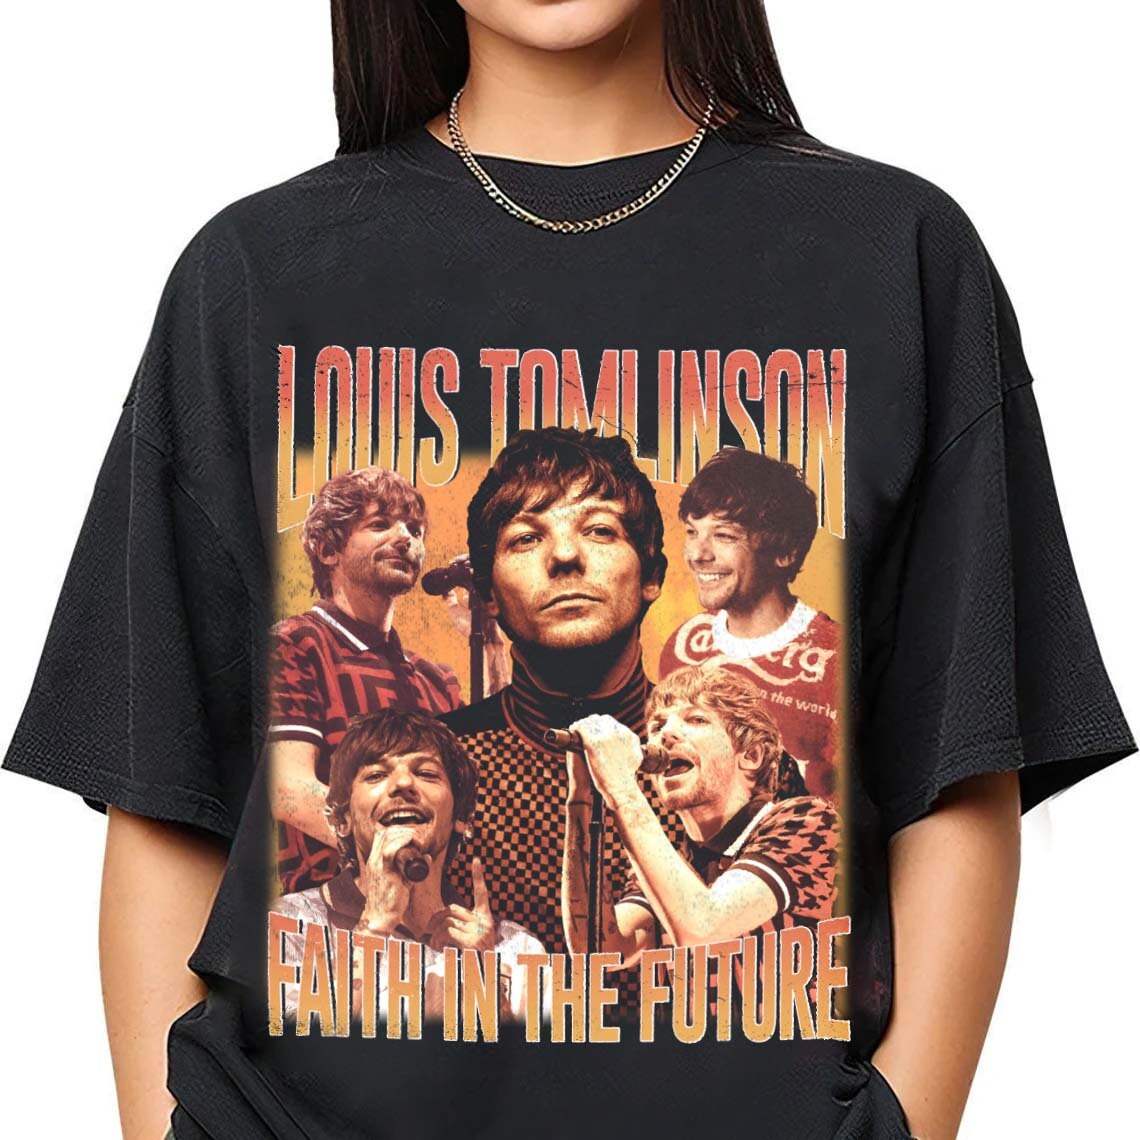 Hot Louis Tomlinson Funny Collection Singer Unisex All Size Shirt 1N1199